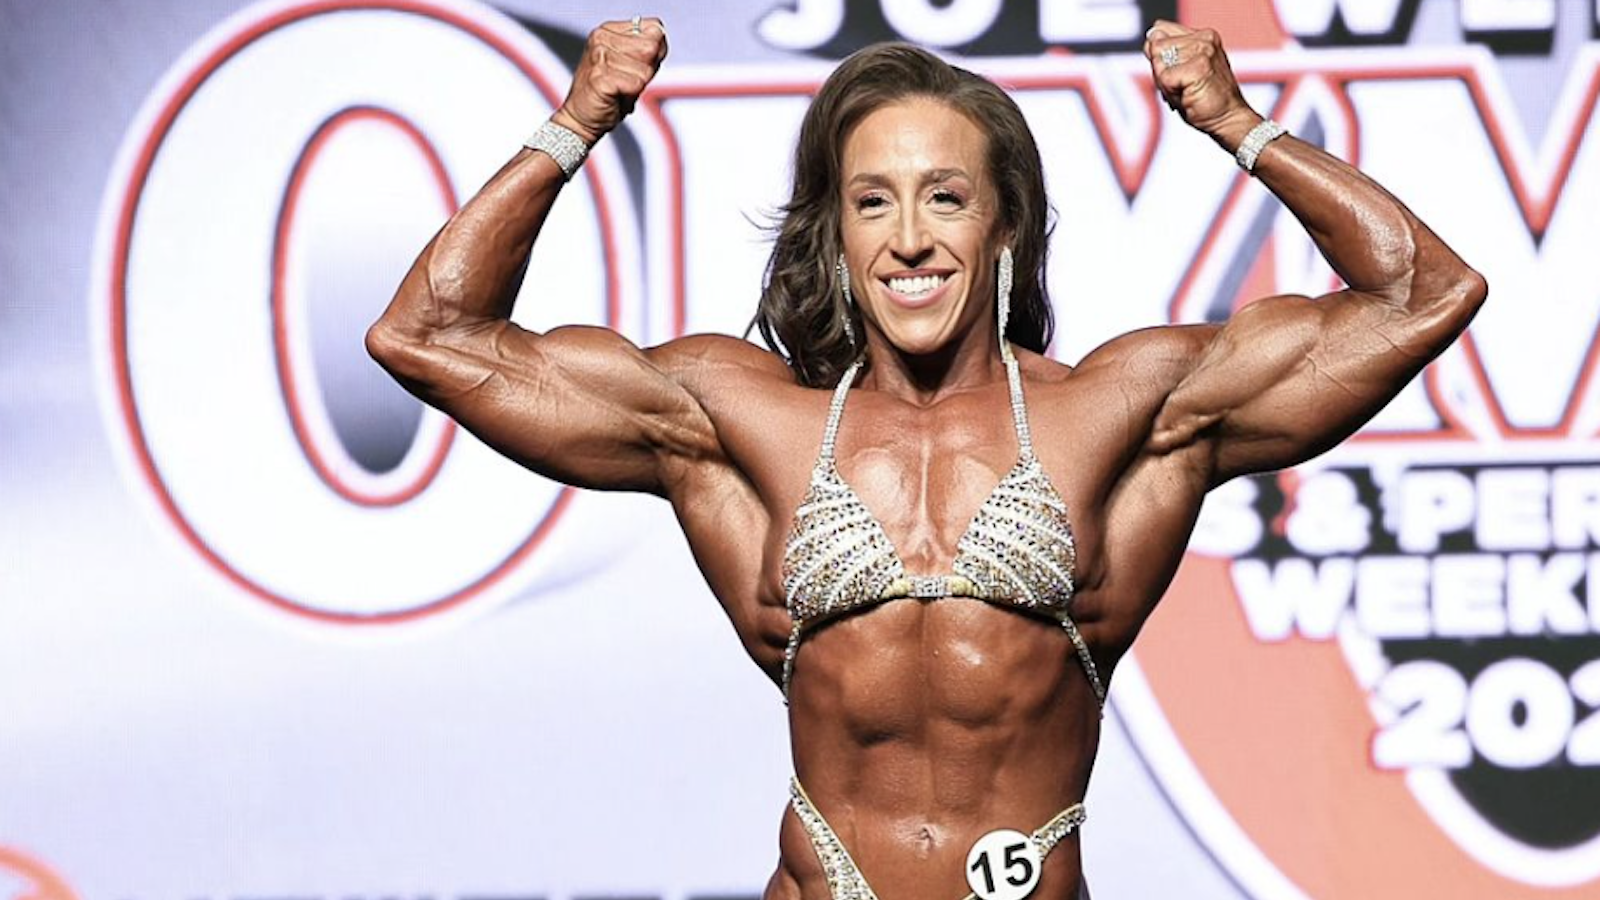 Sarah Villegas Wins 2023 Women's Physique Olympia, Reclaiming the Crown